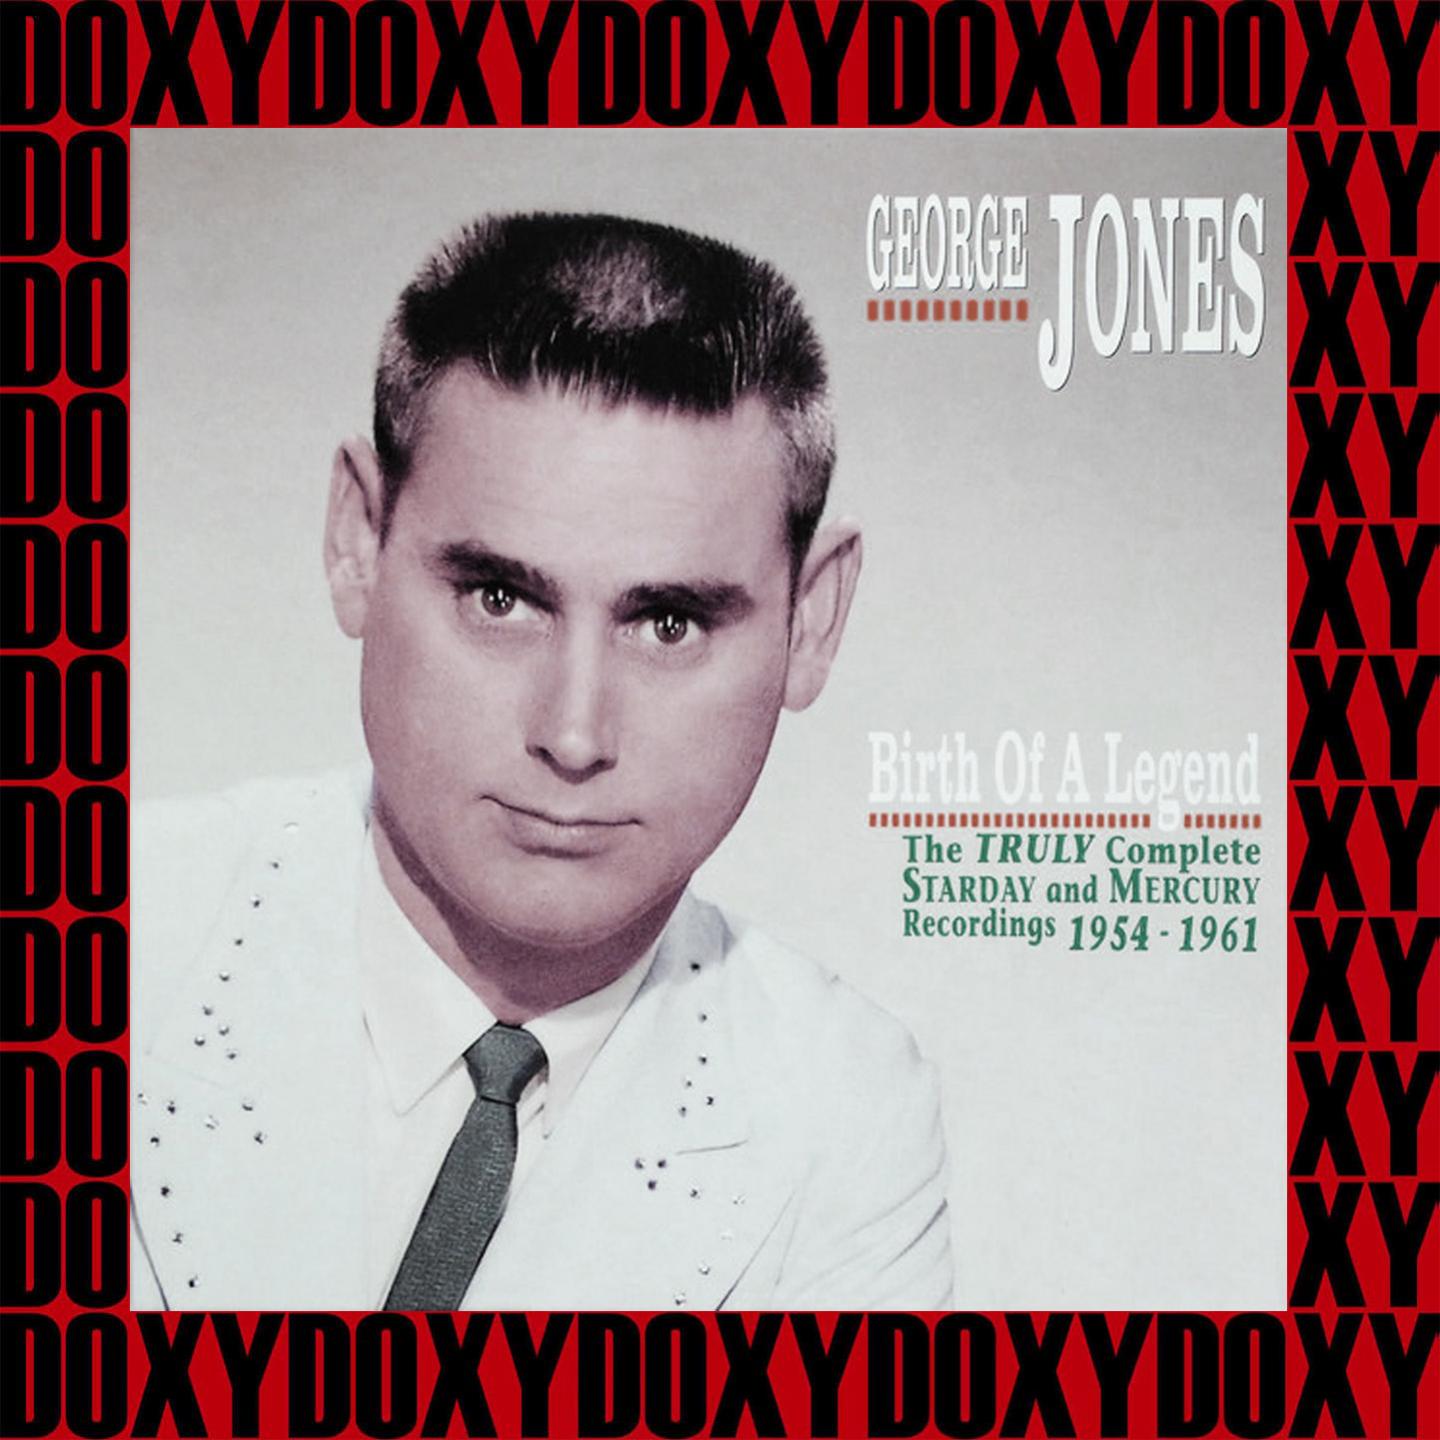 Birth Of A Legend, 1954-1961 Vol. 4 (Remastered Version) (Doxy Collection)